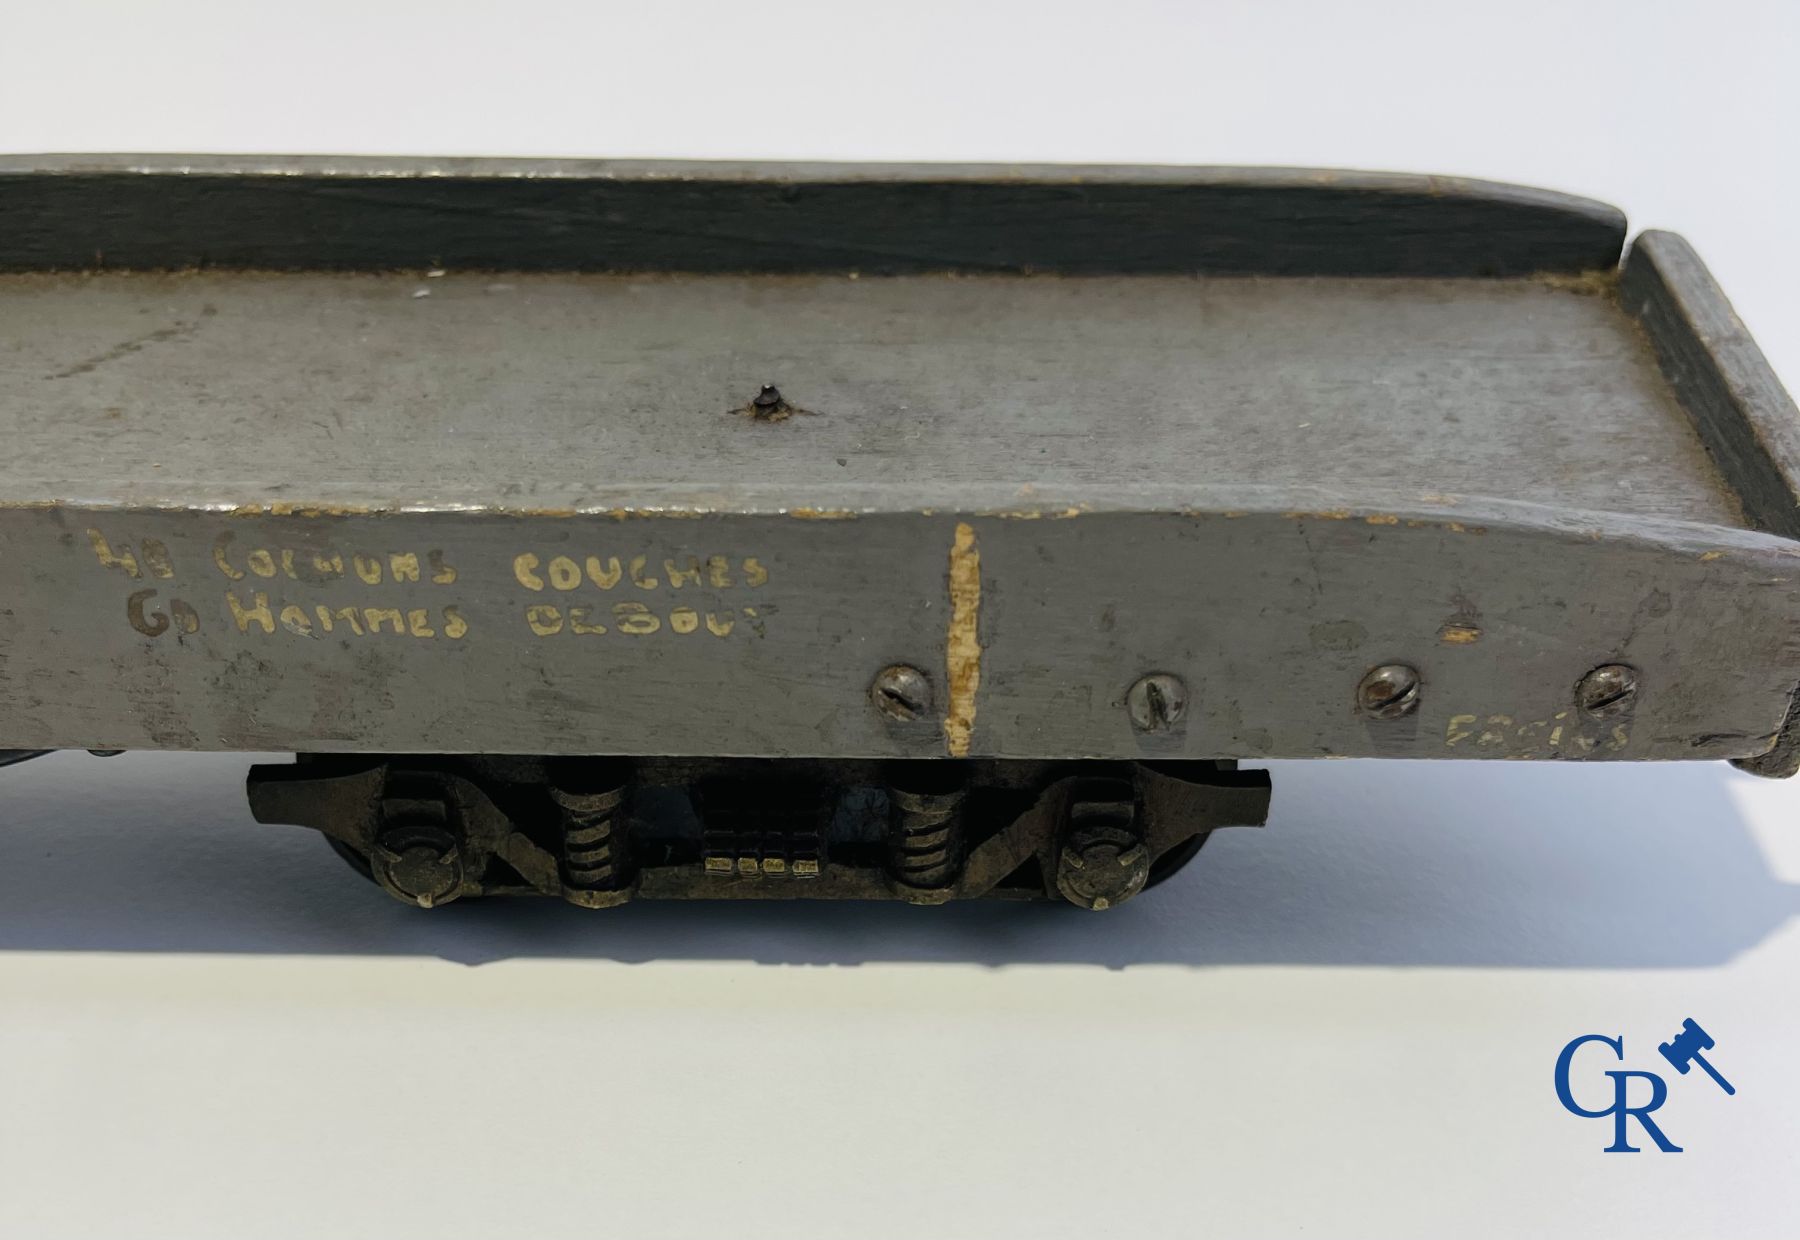 Old toys: Märklin, Locomotive with towing tender and dining car.
About 1930. - Image 26 of 32